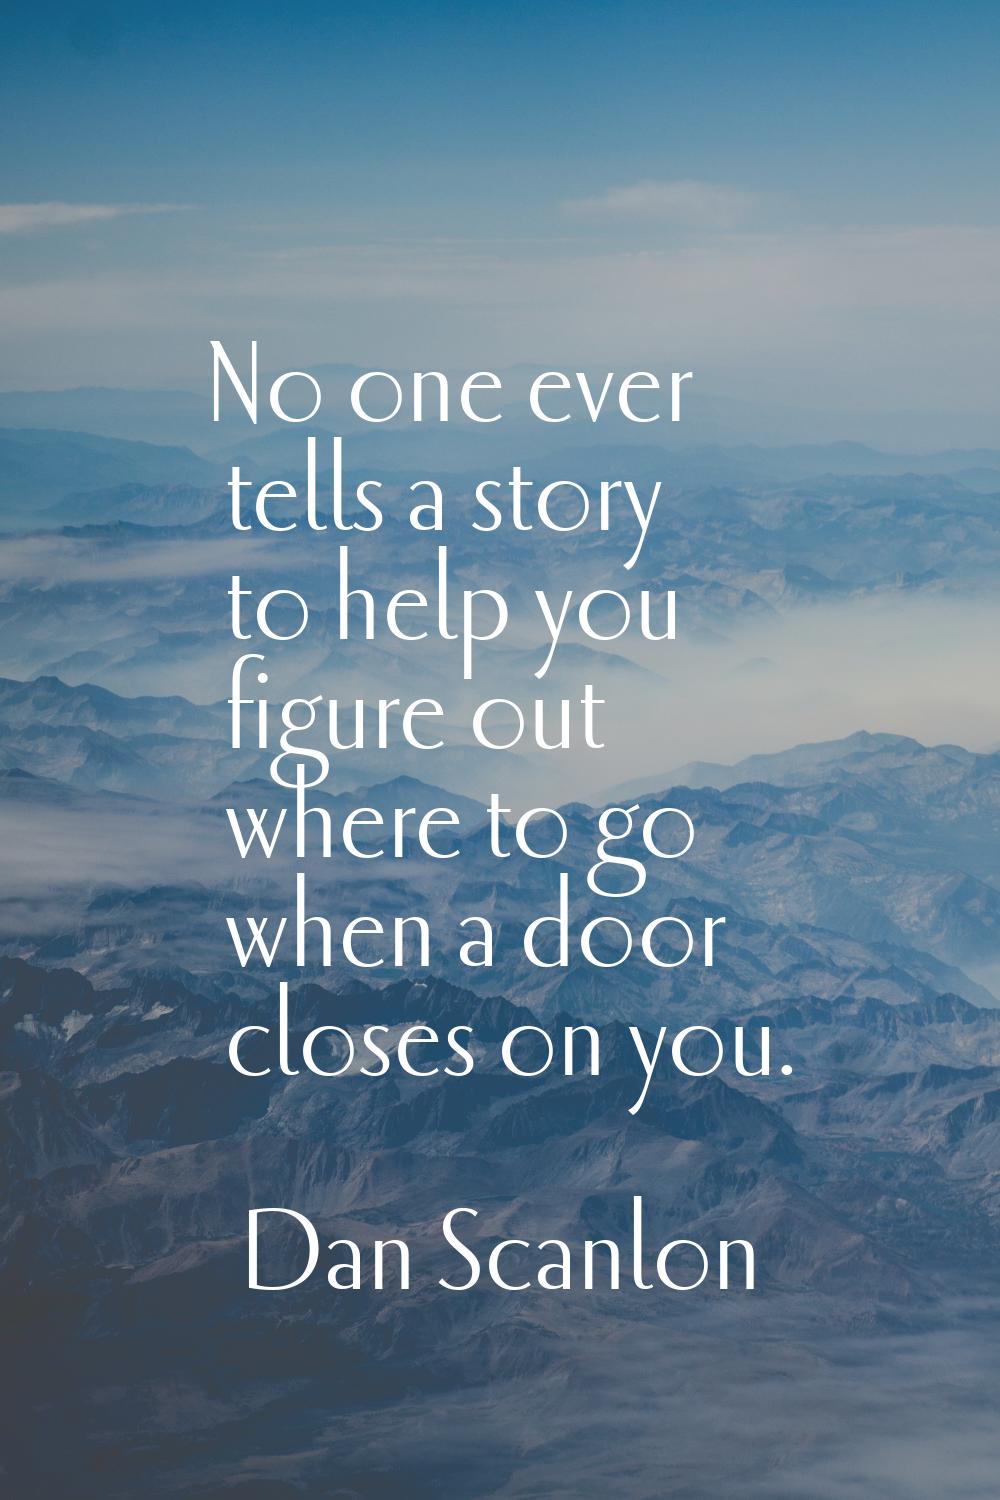 No one ever tells a story to help you figure out where to go when a door closes on you.